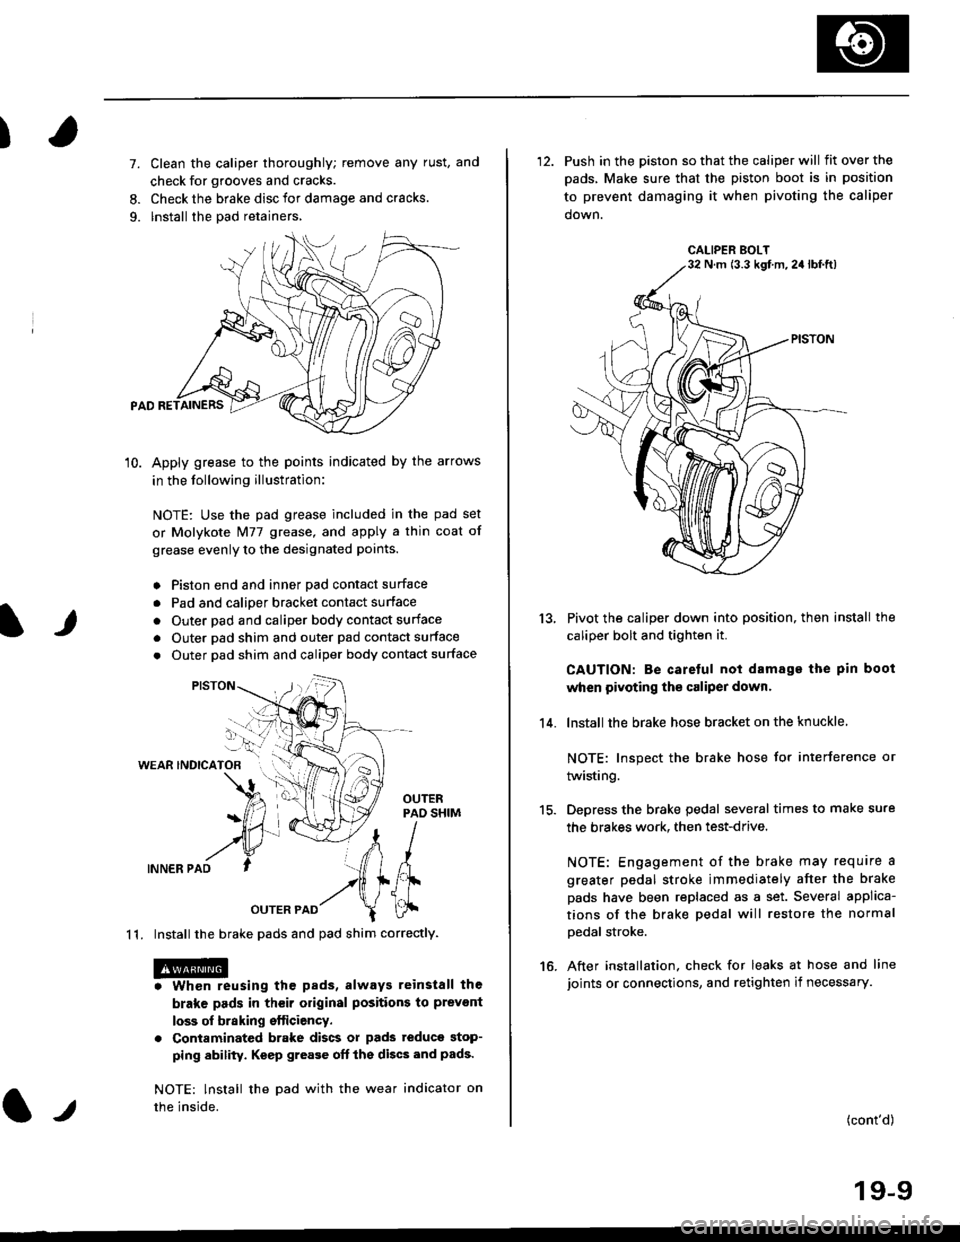 HONDA CIVIC 1996 6.G Workshop Manual )
It
7. Clean the caliper thoroughly; remove any rust, and
check for grooves and cracks.
8. Check the brake disc for damage and cracks.
9. lnstall the pad retainers,
10. Apply grease to the points ind